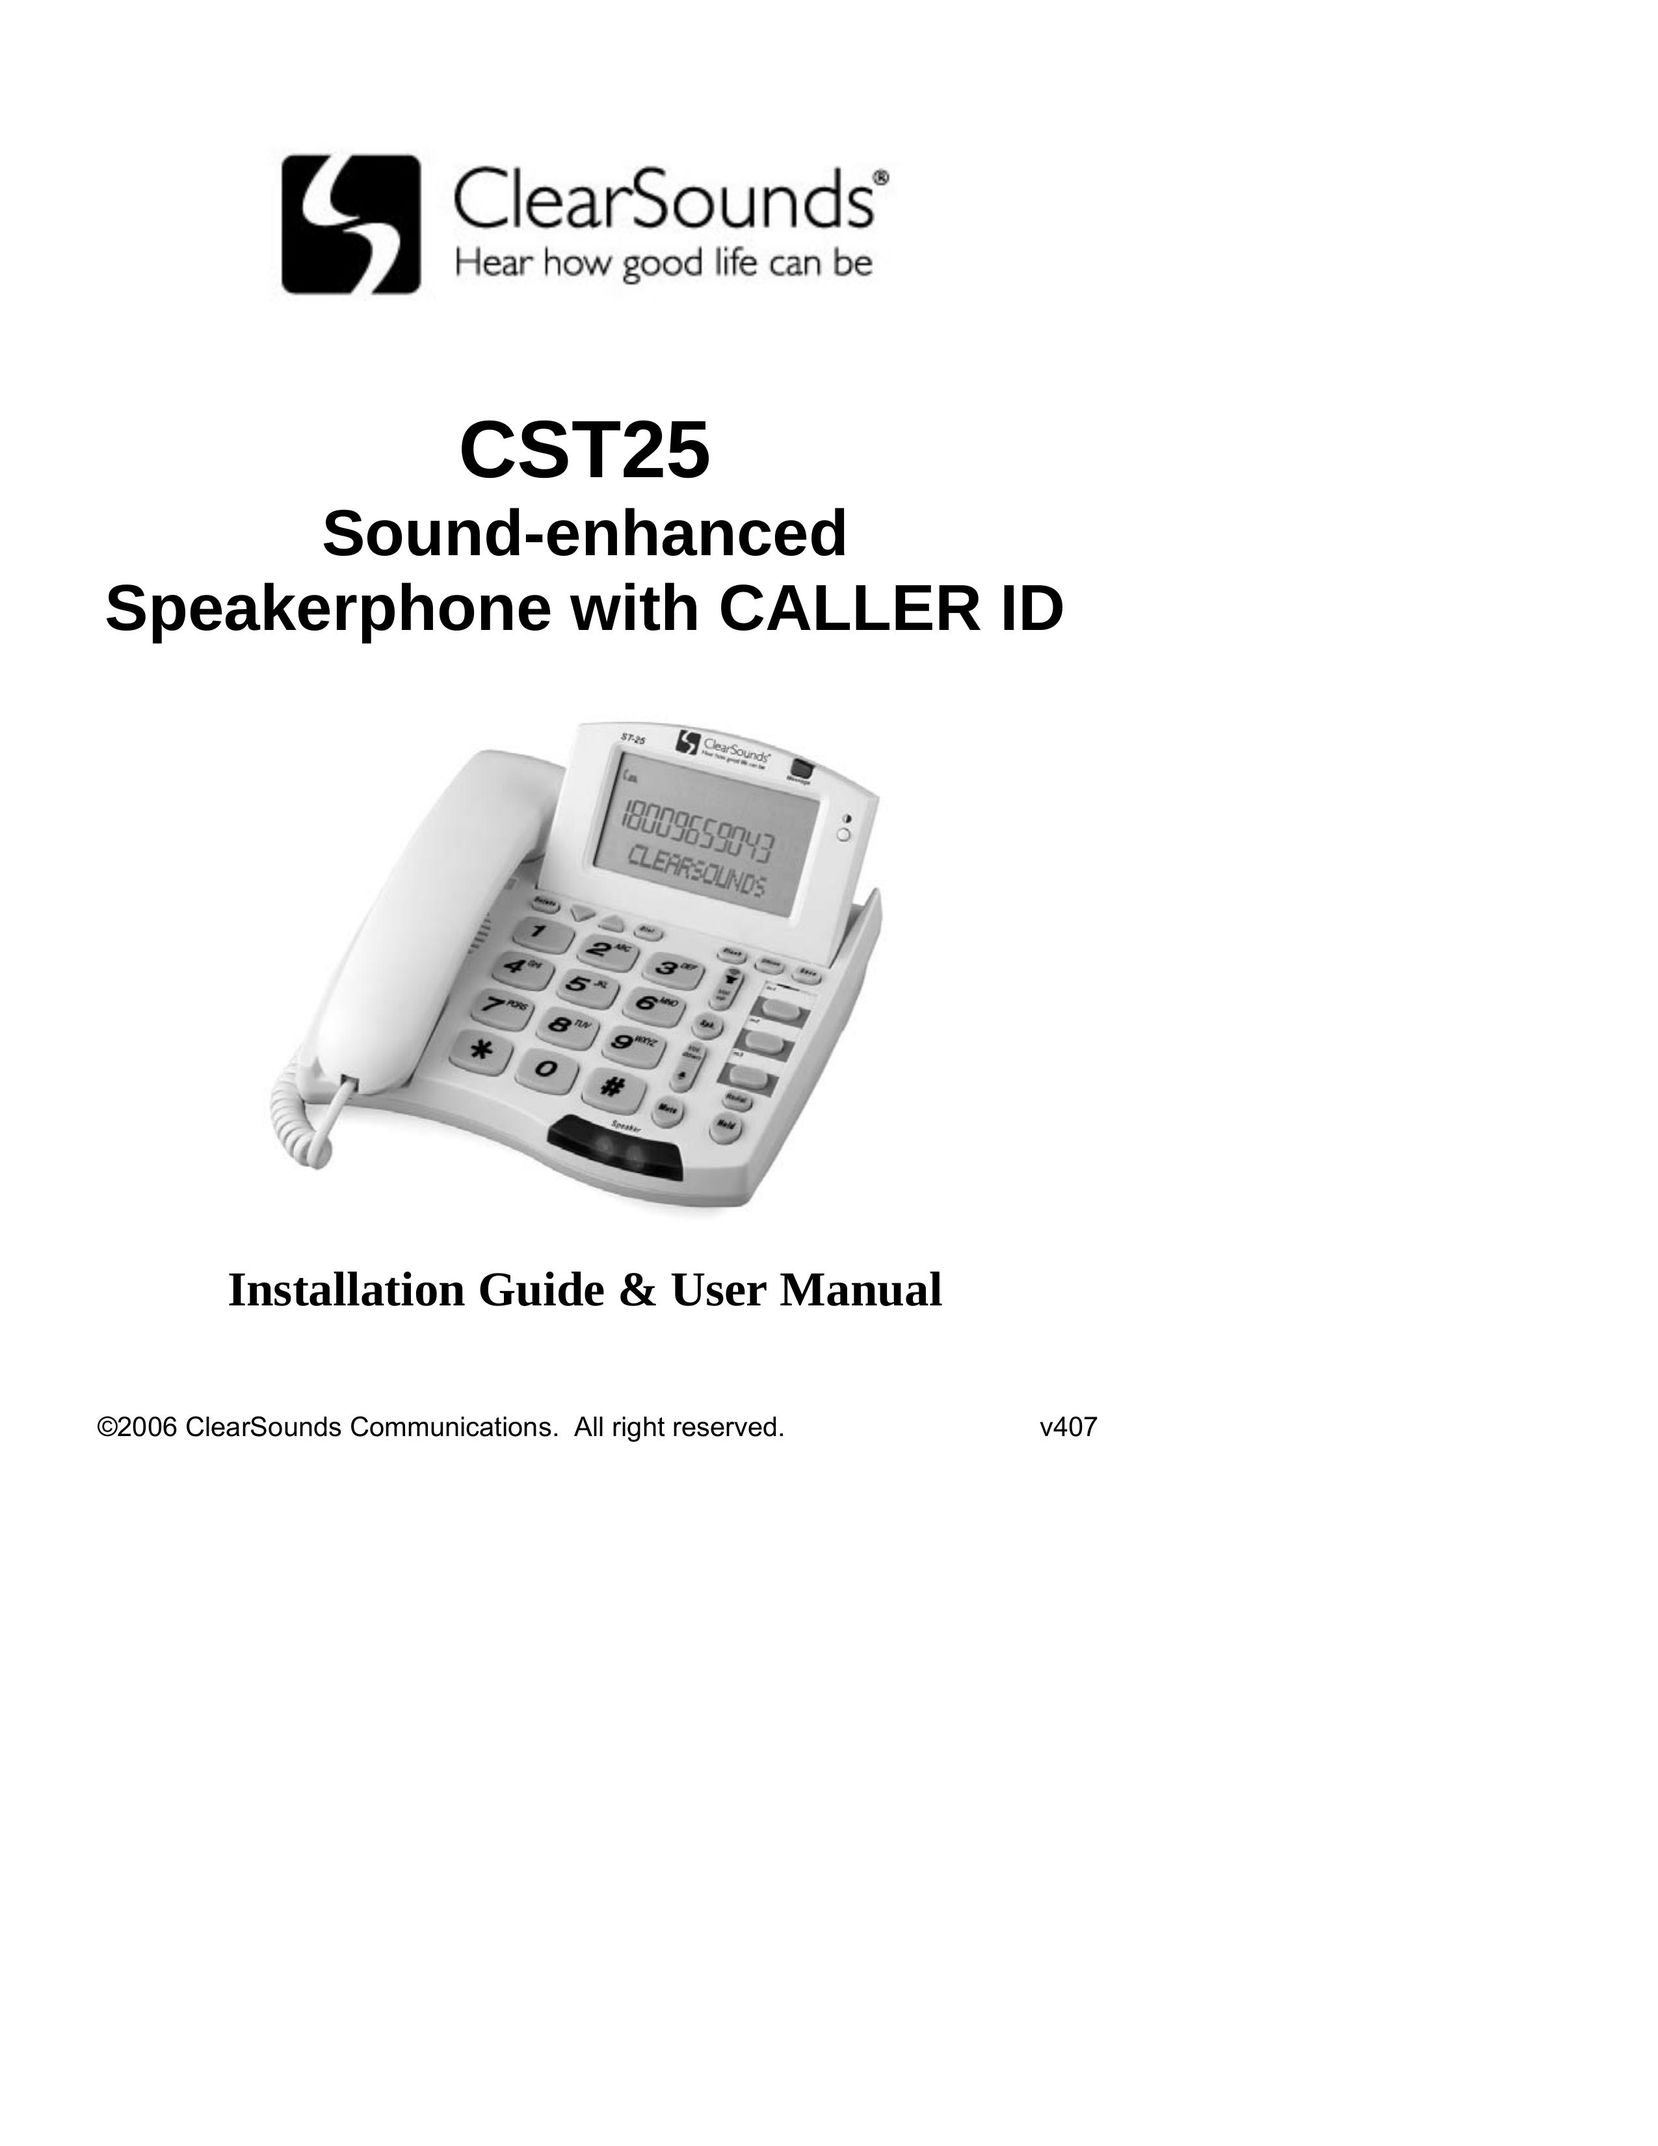 ClearSounds CST25 Conference Phone User Manual